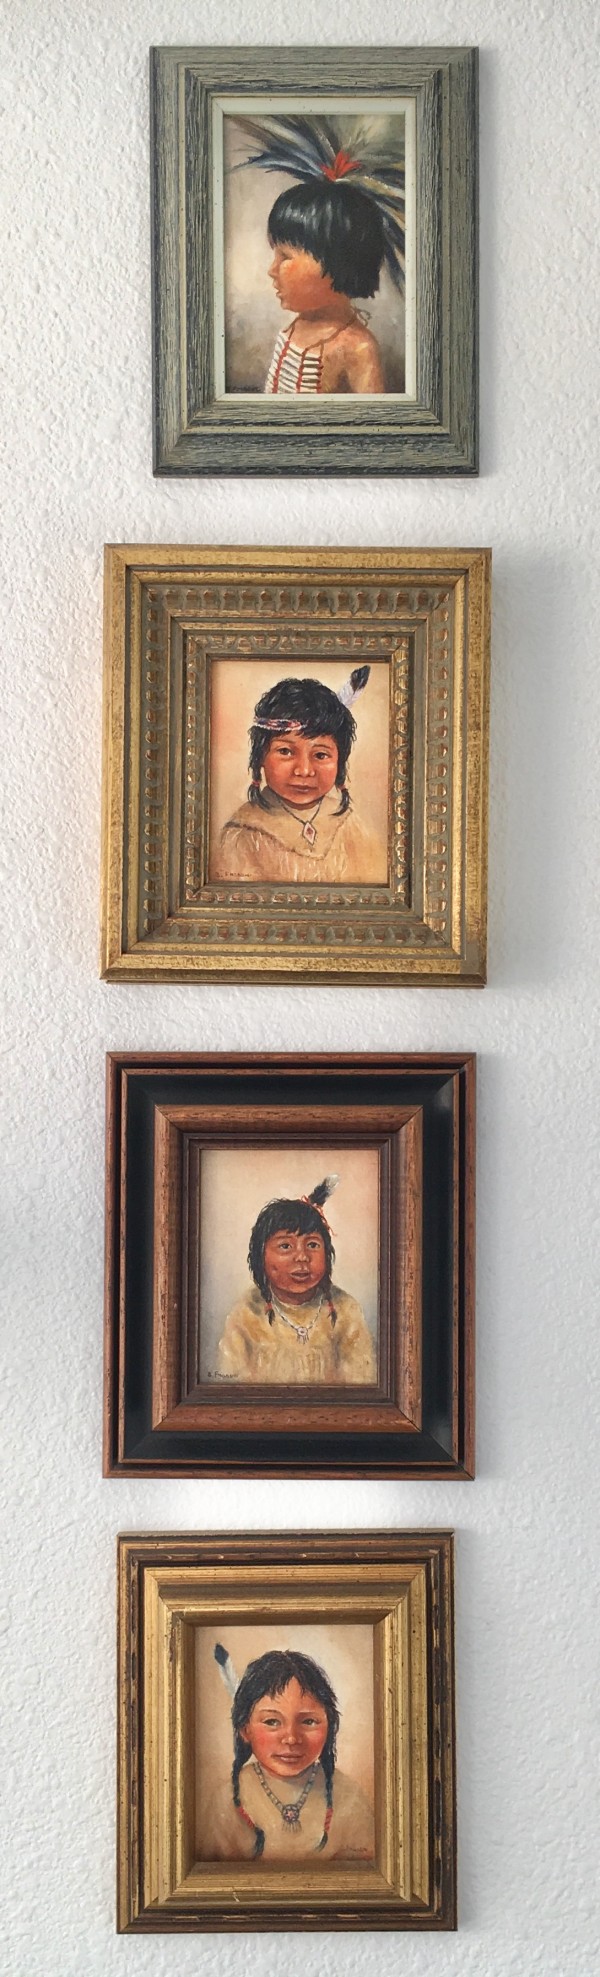 Native American Children (4 mini paintings) by Sandra (Fraser) Dust by Sandra (Fraser) Dust